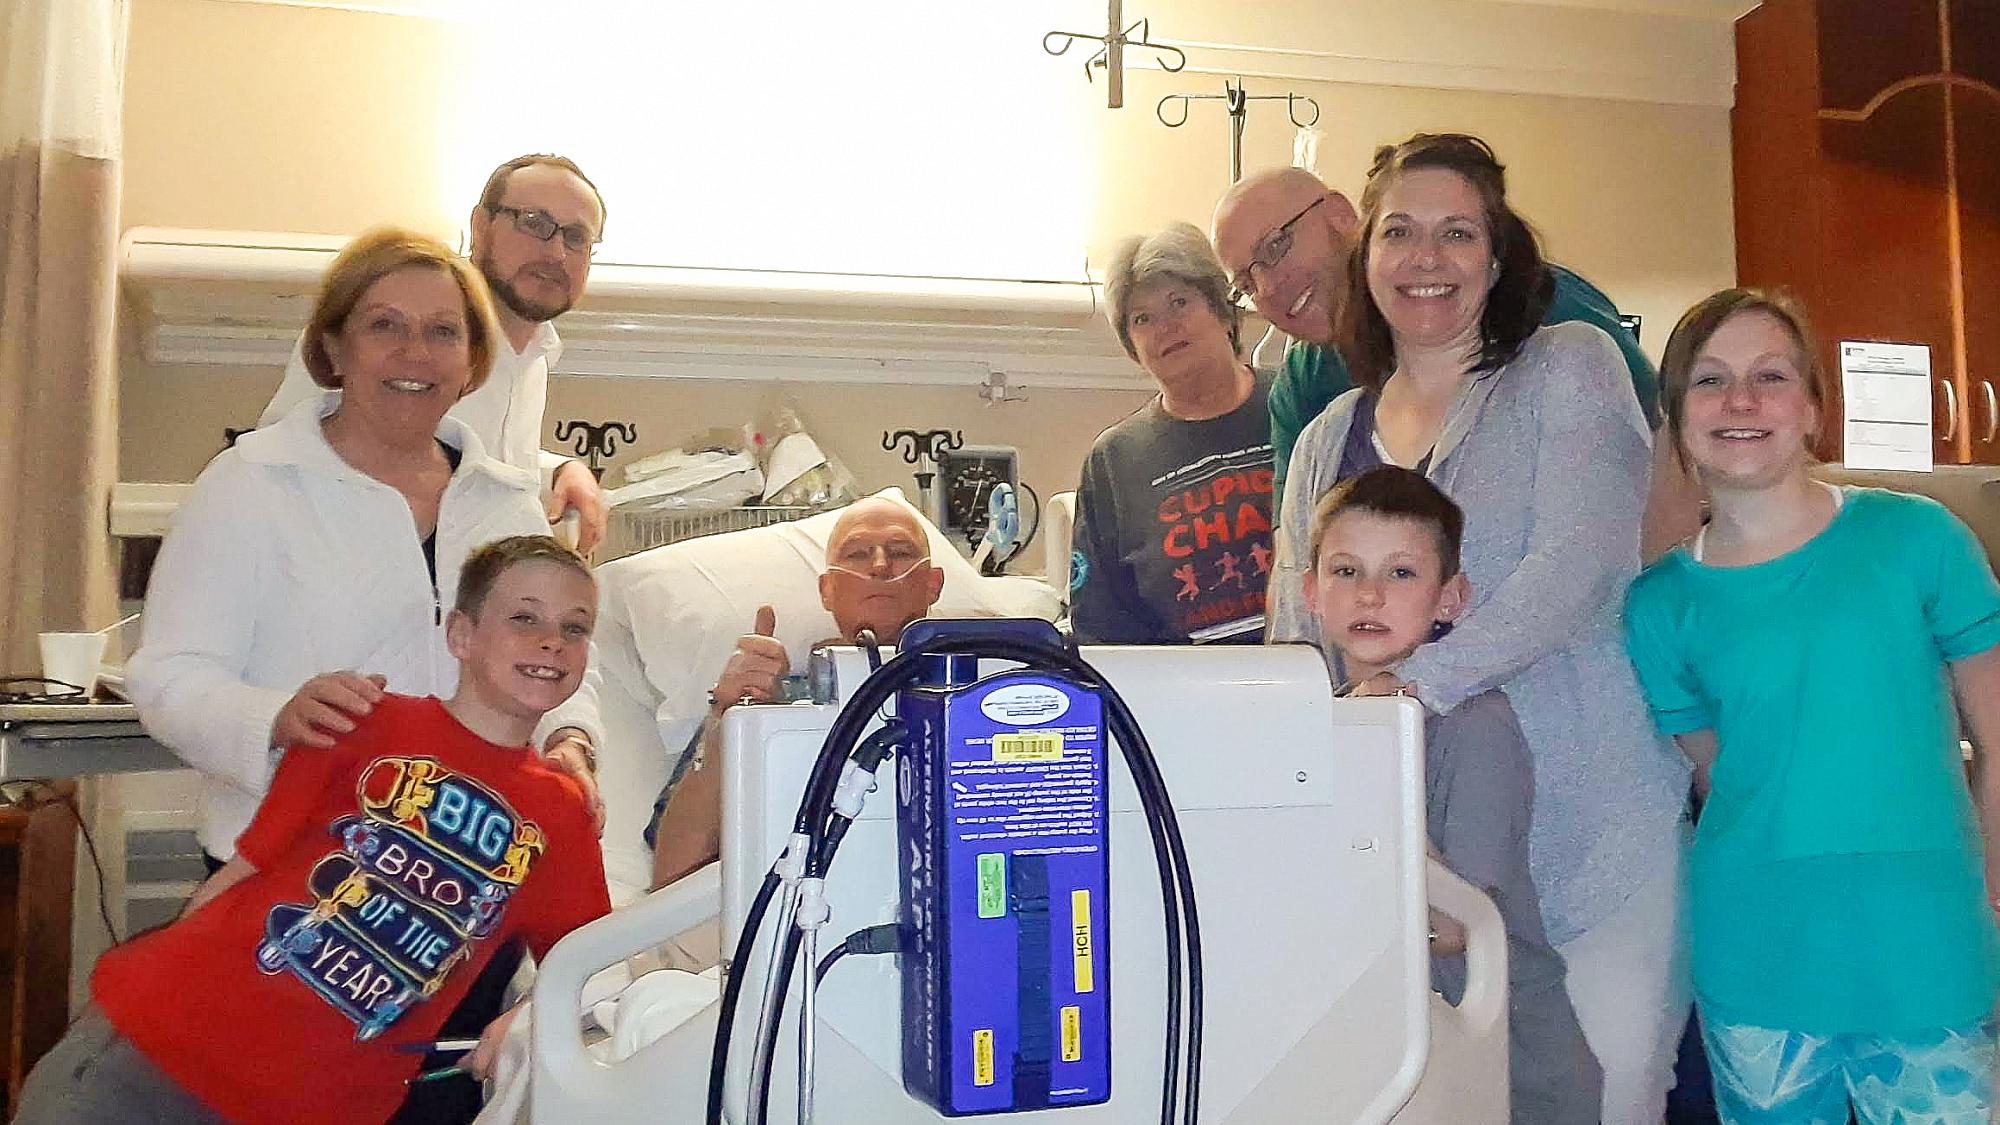 The Simonson family rallies around Jerry after his surgery. Jerry lies in a hospital bed, giving a thumbs up, while his family stands around the bed and smiles for the camera.